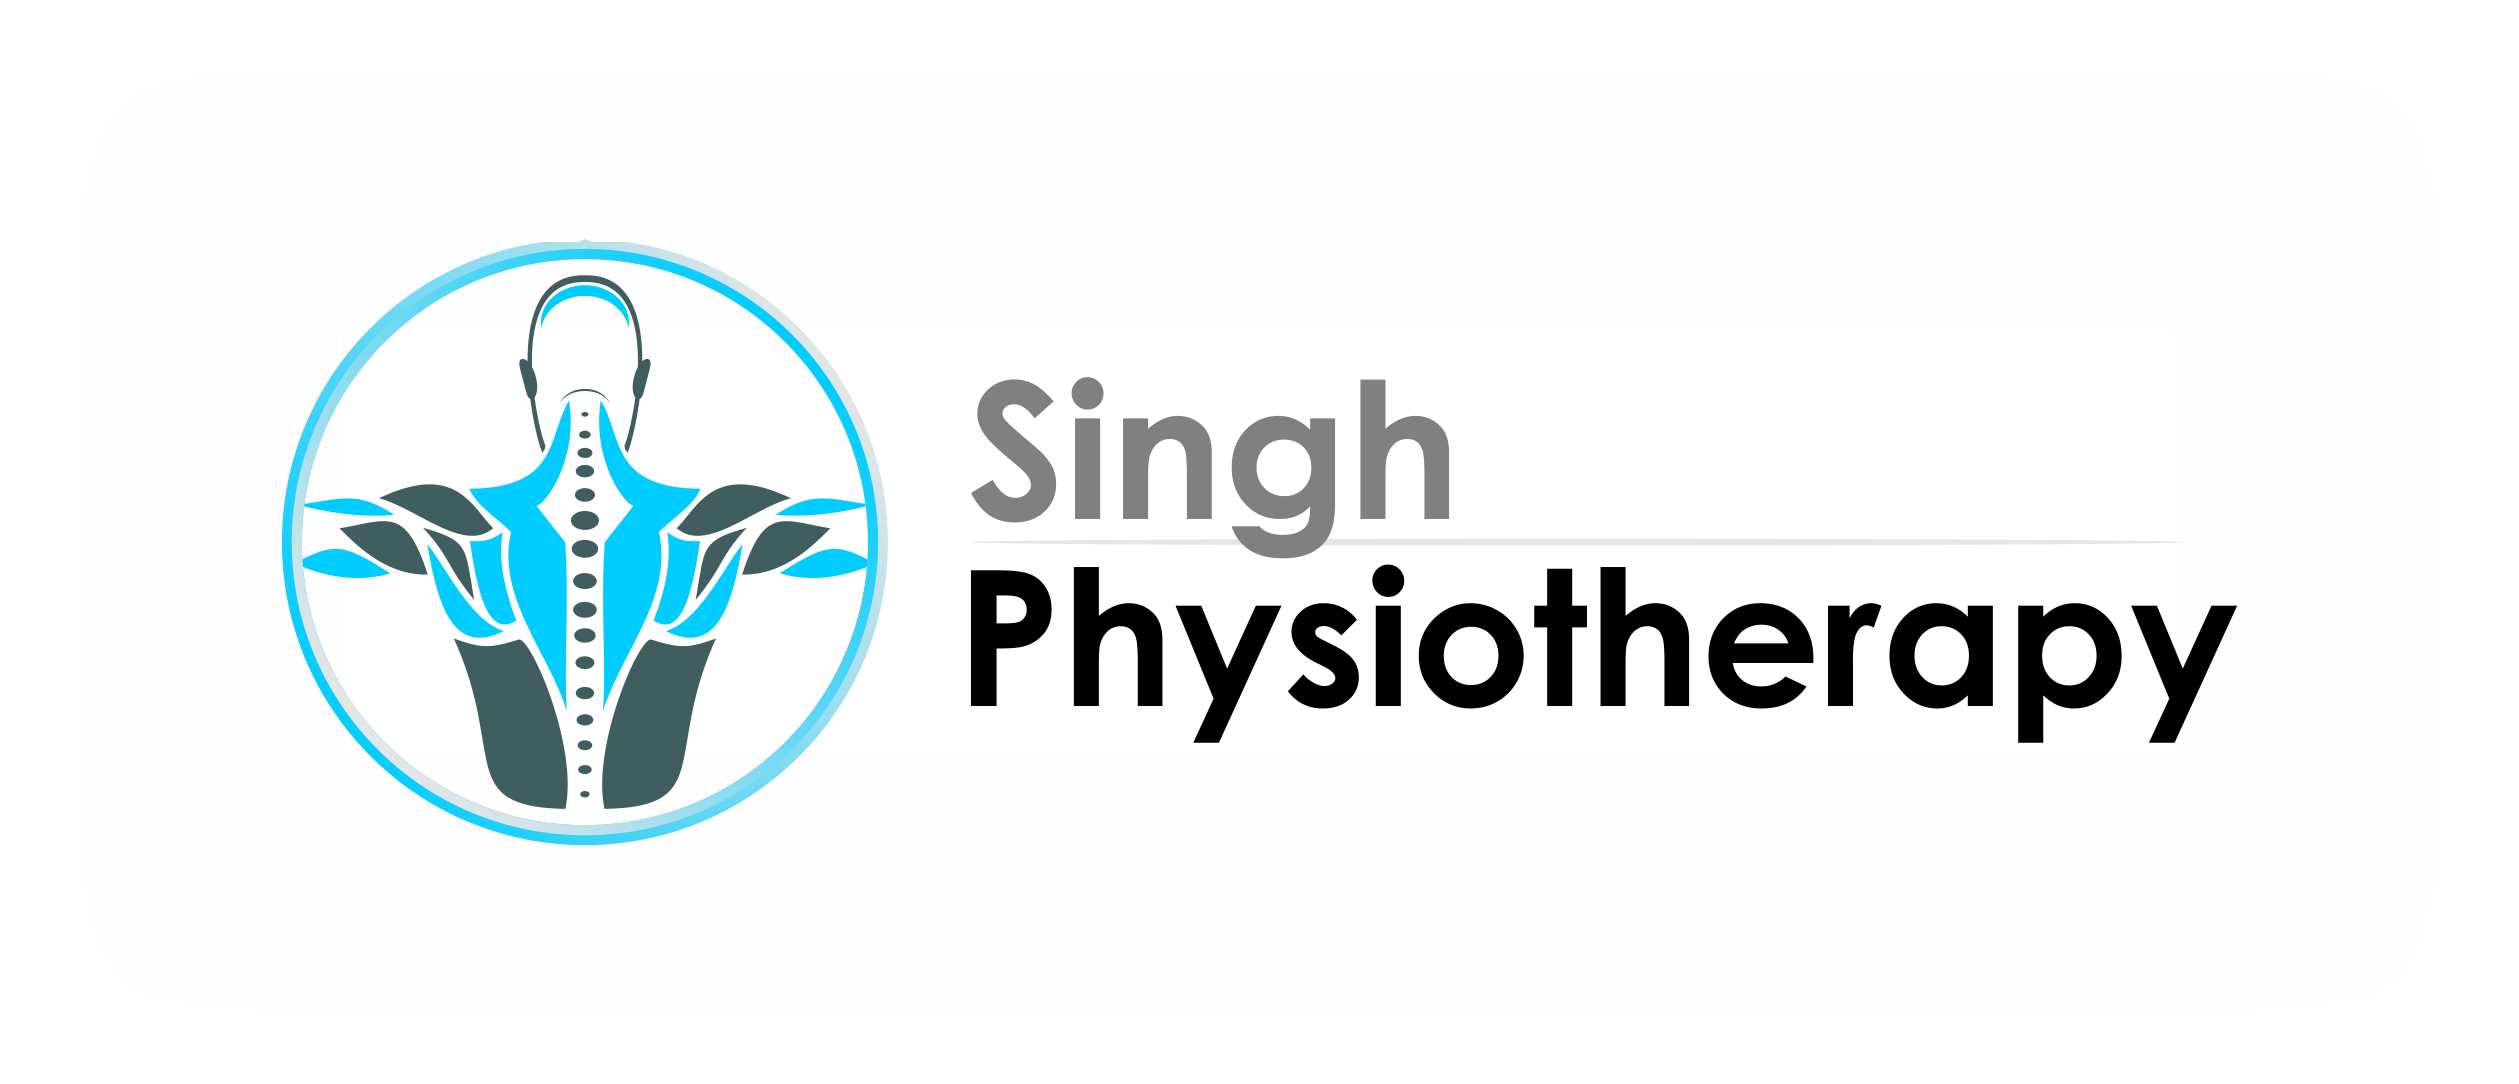 Singh Physiotherapy|Healthcare|Medical Services